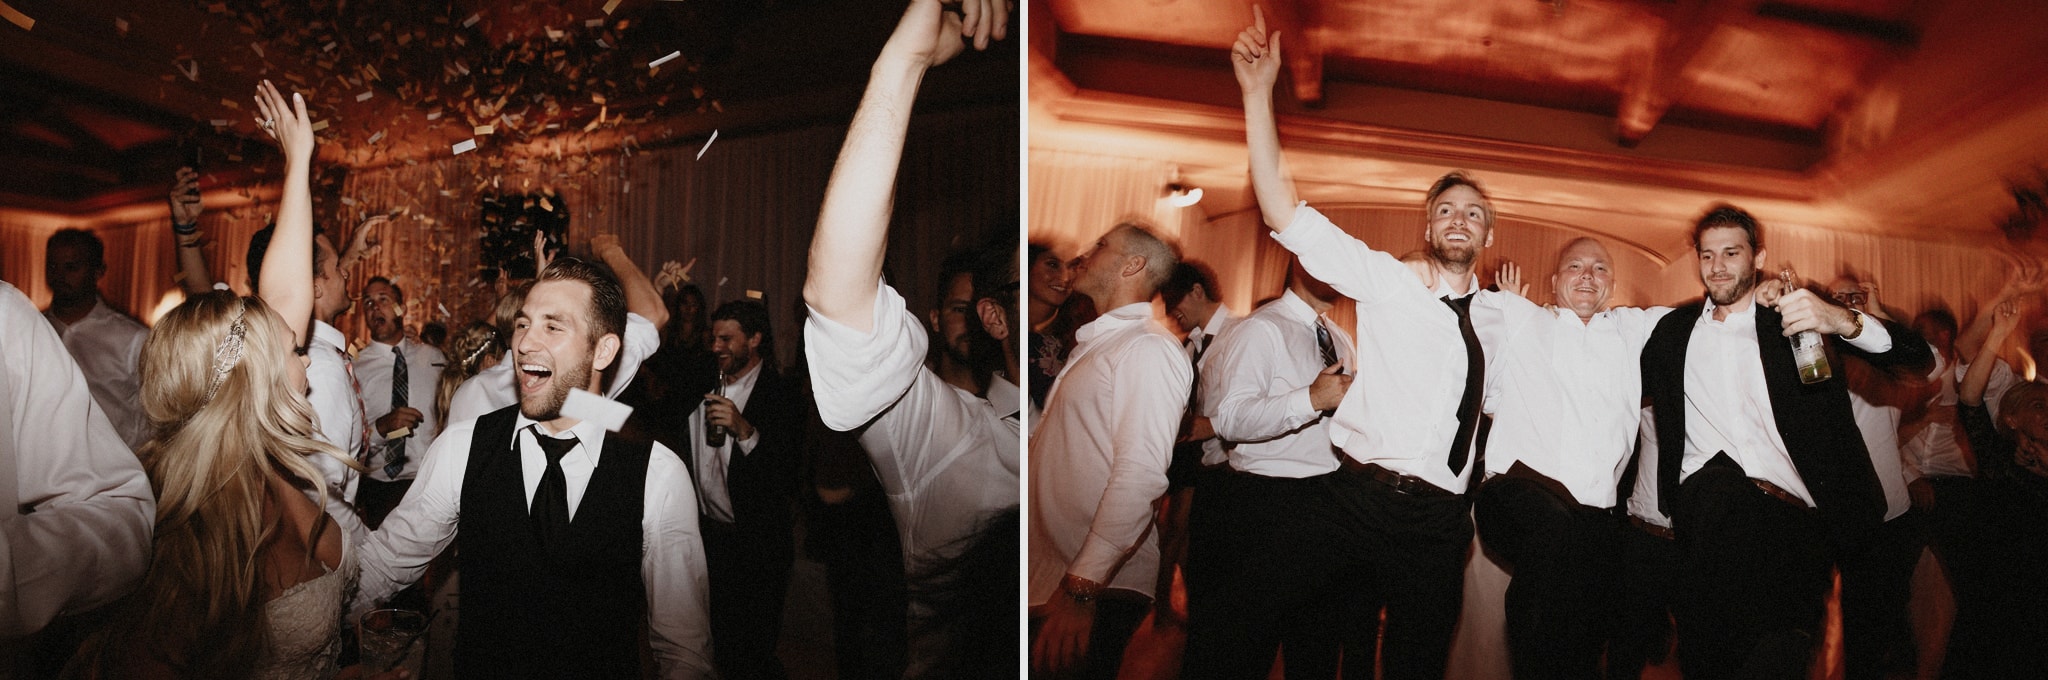 Guests dance while confetti flies in the air during a fun wedding in Orange County.